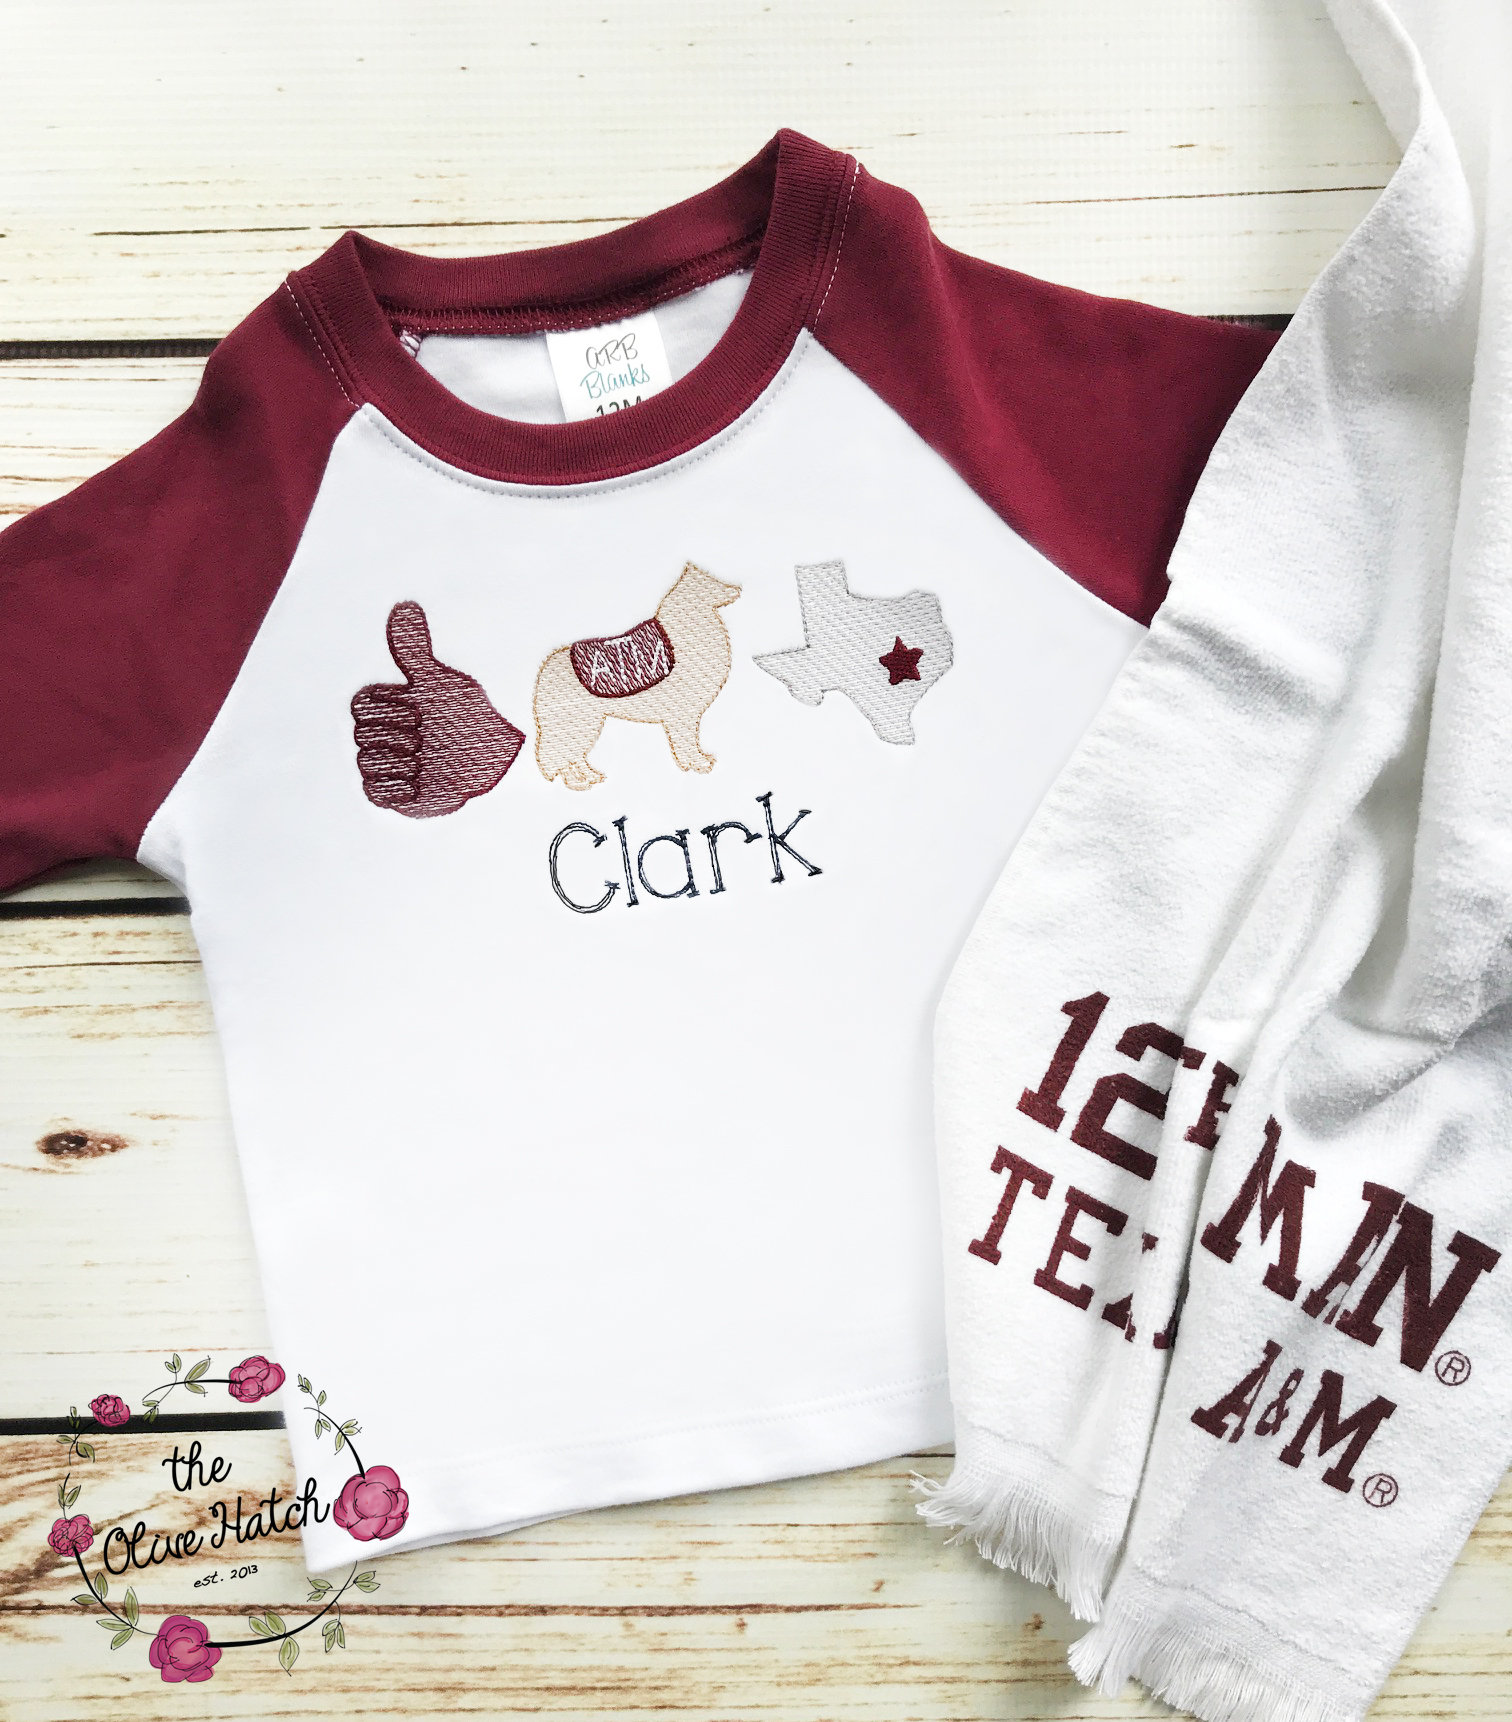 Applique Embroidery Team Spirit Football Trio Sketch Shirt Maroon and White